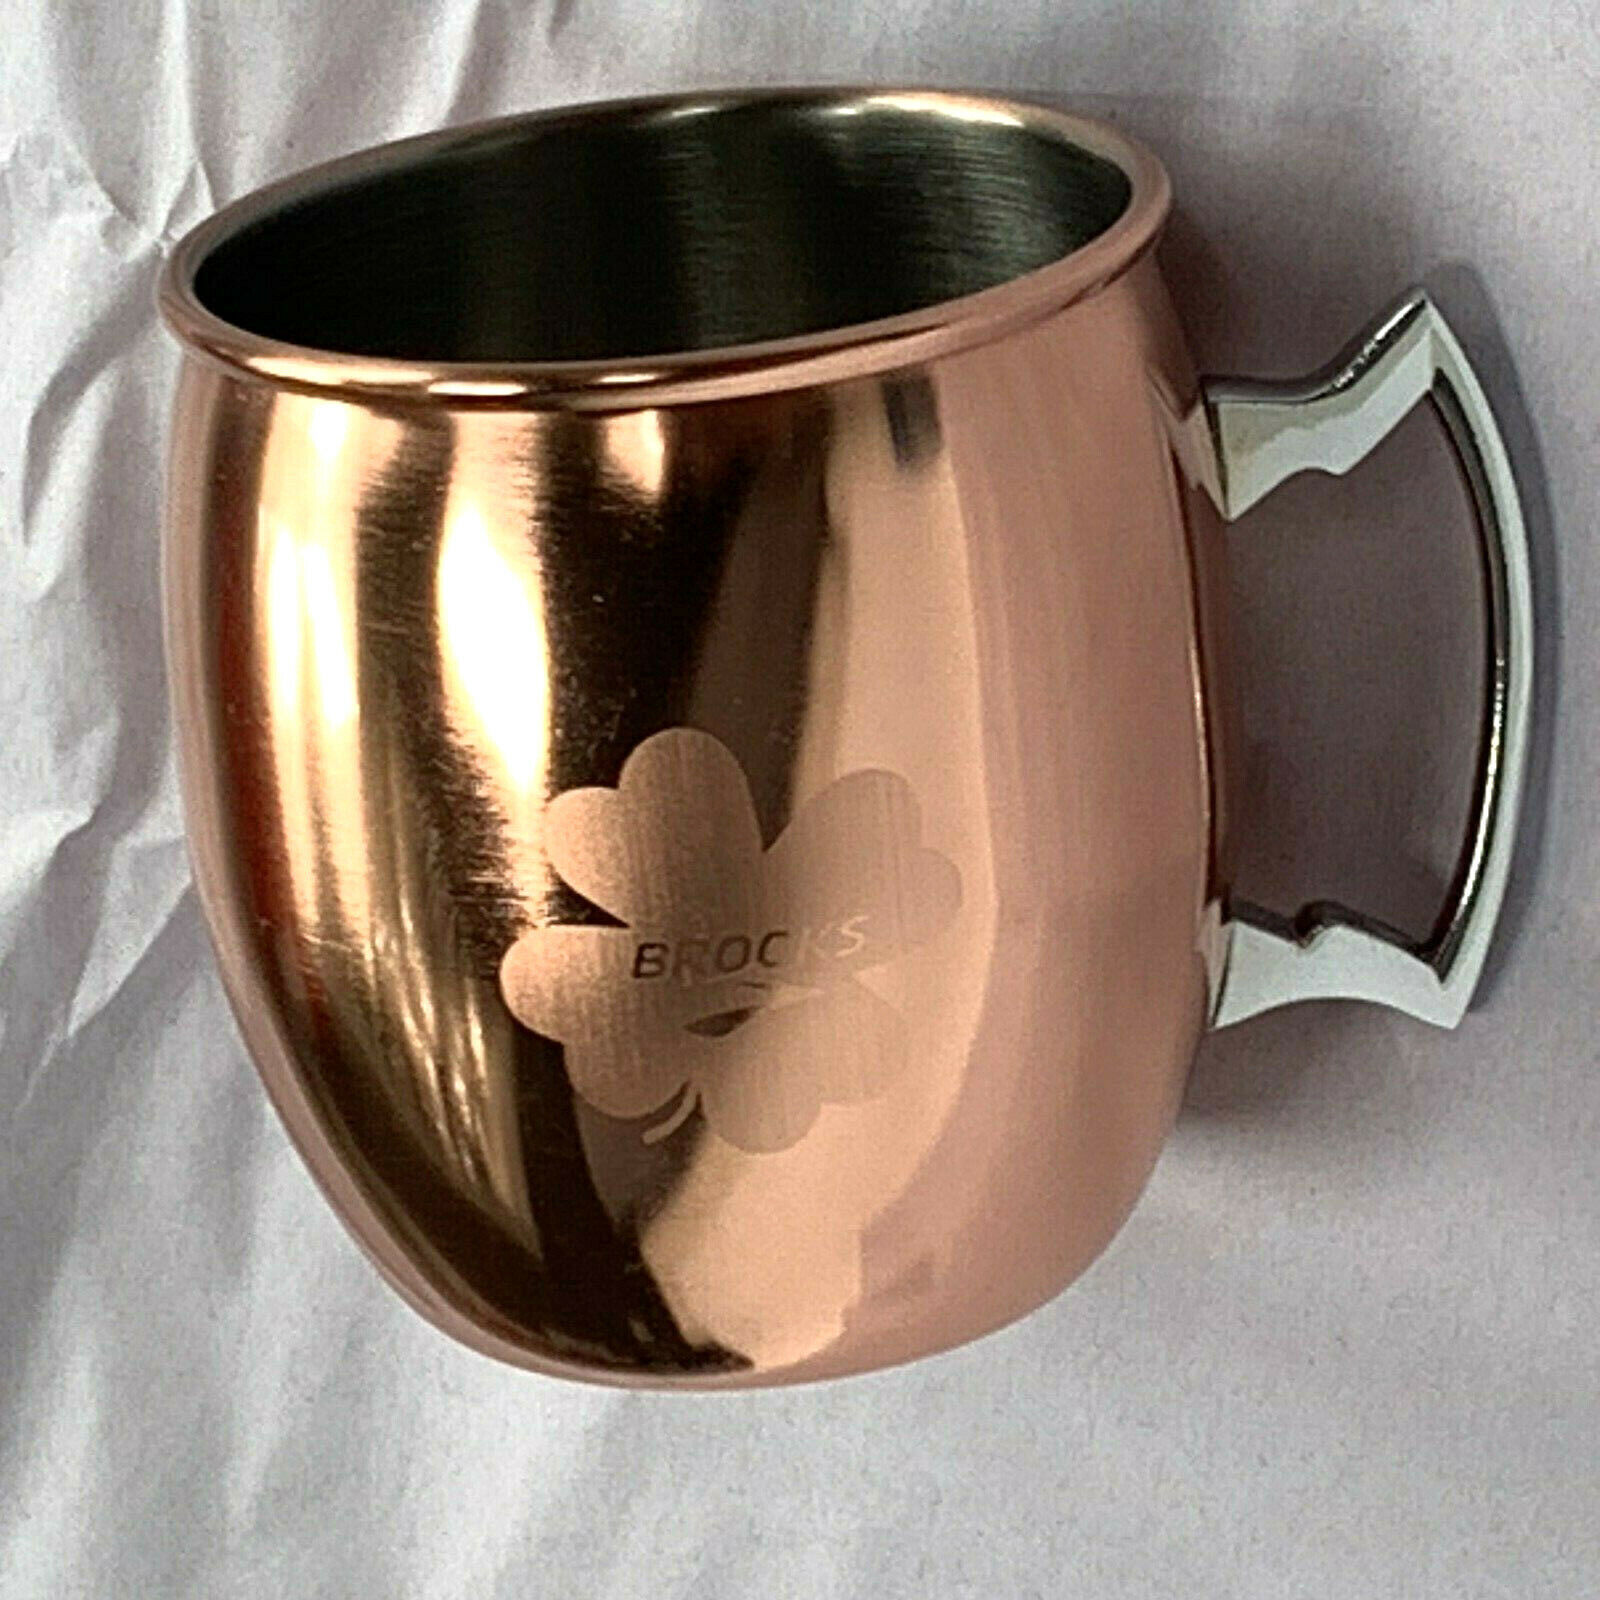 Brooks Running Co St Patty’s Day Shamrock Metal Cup w Handle Moscow Mule 16 oz